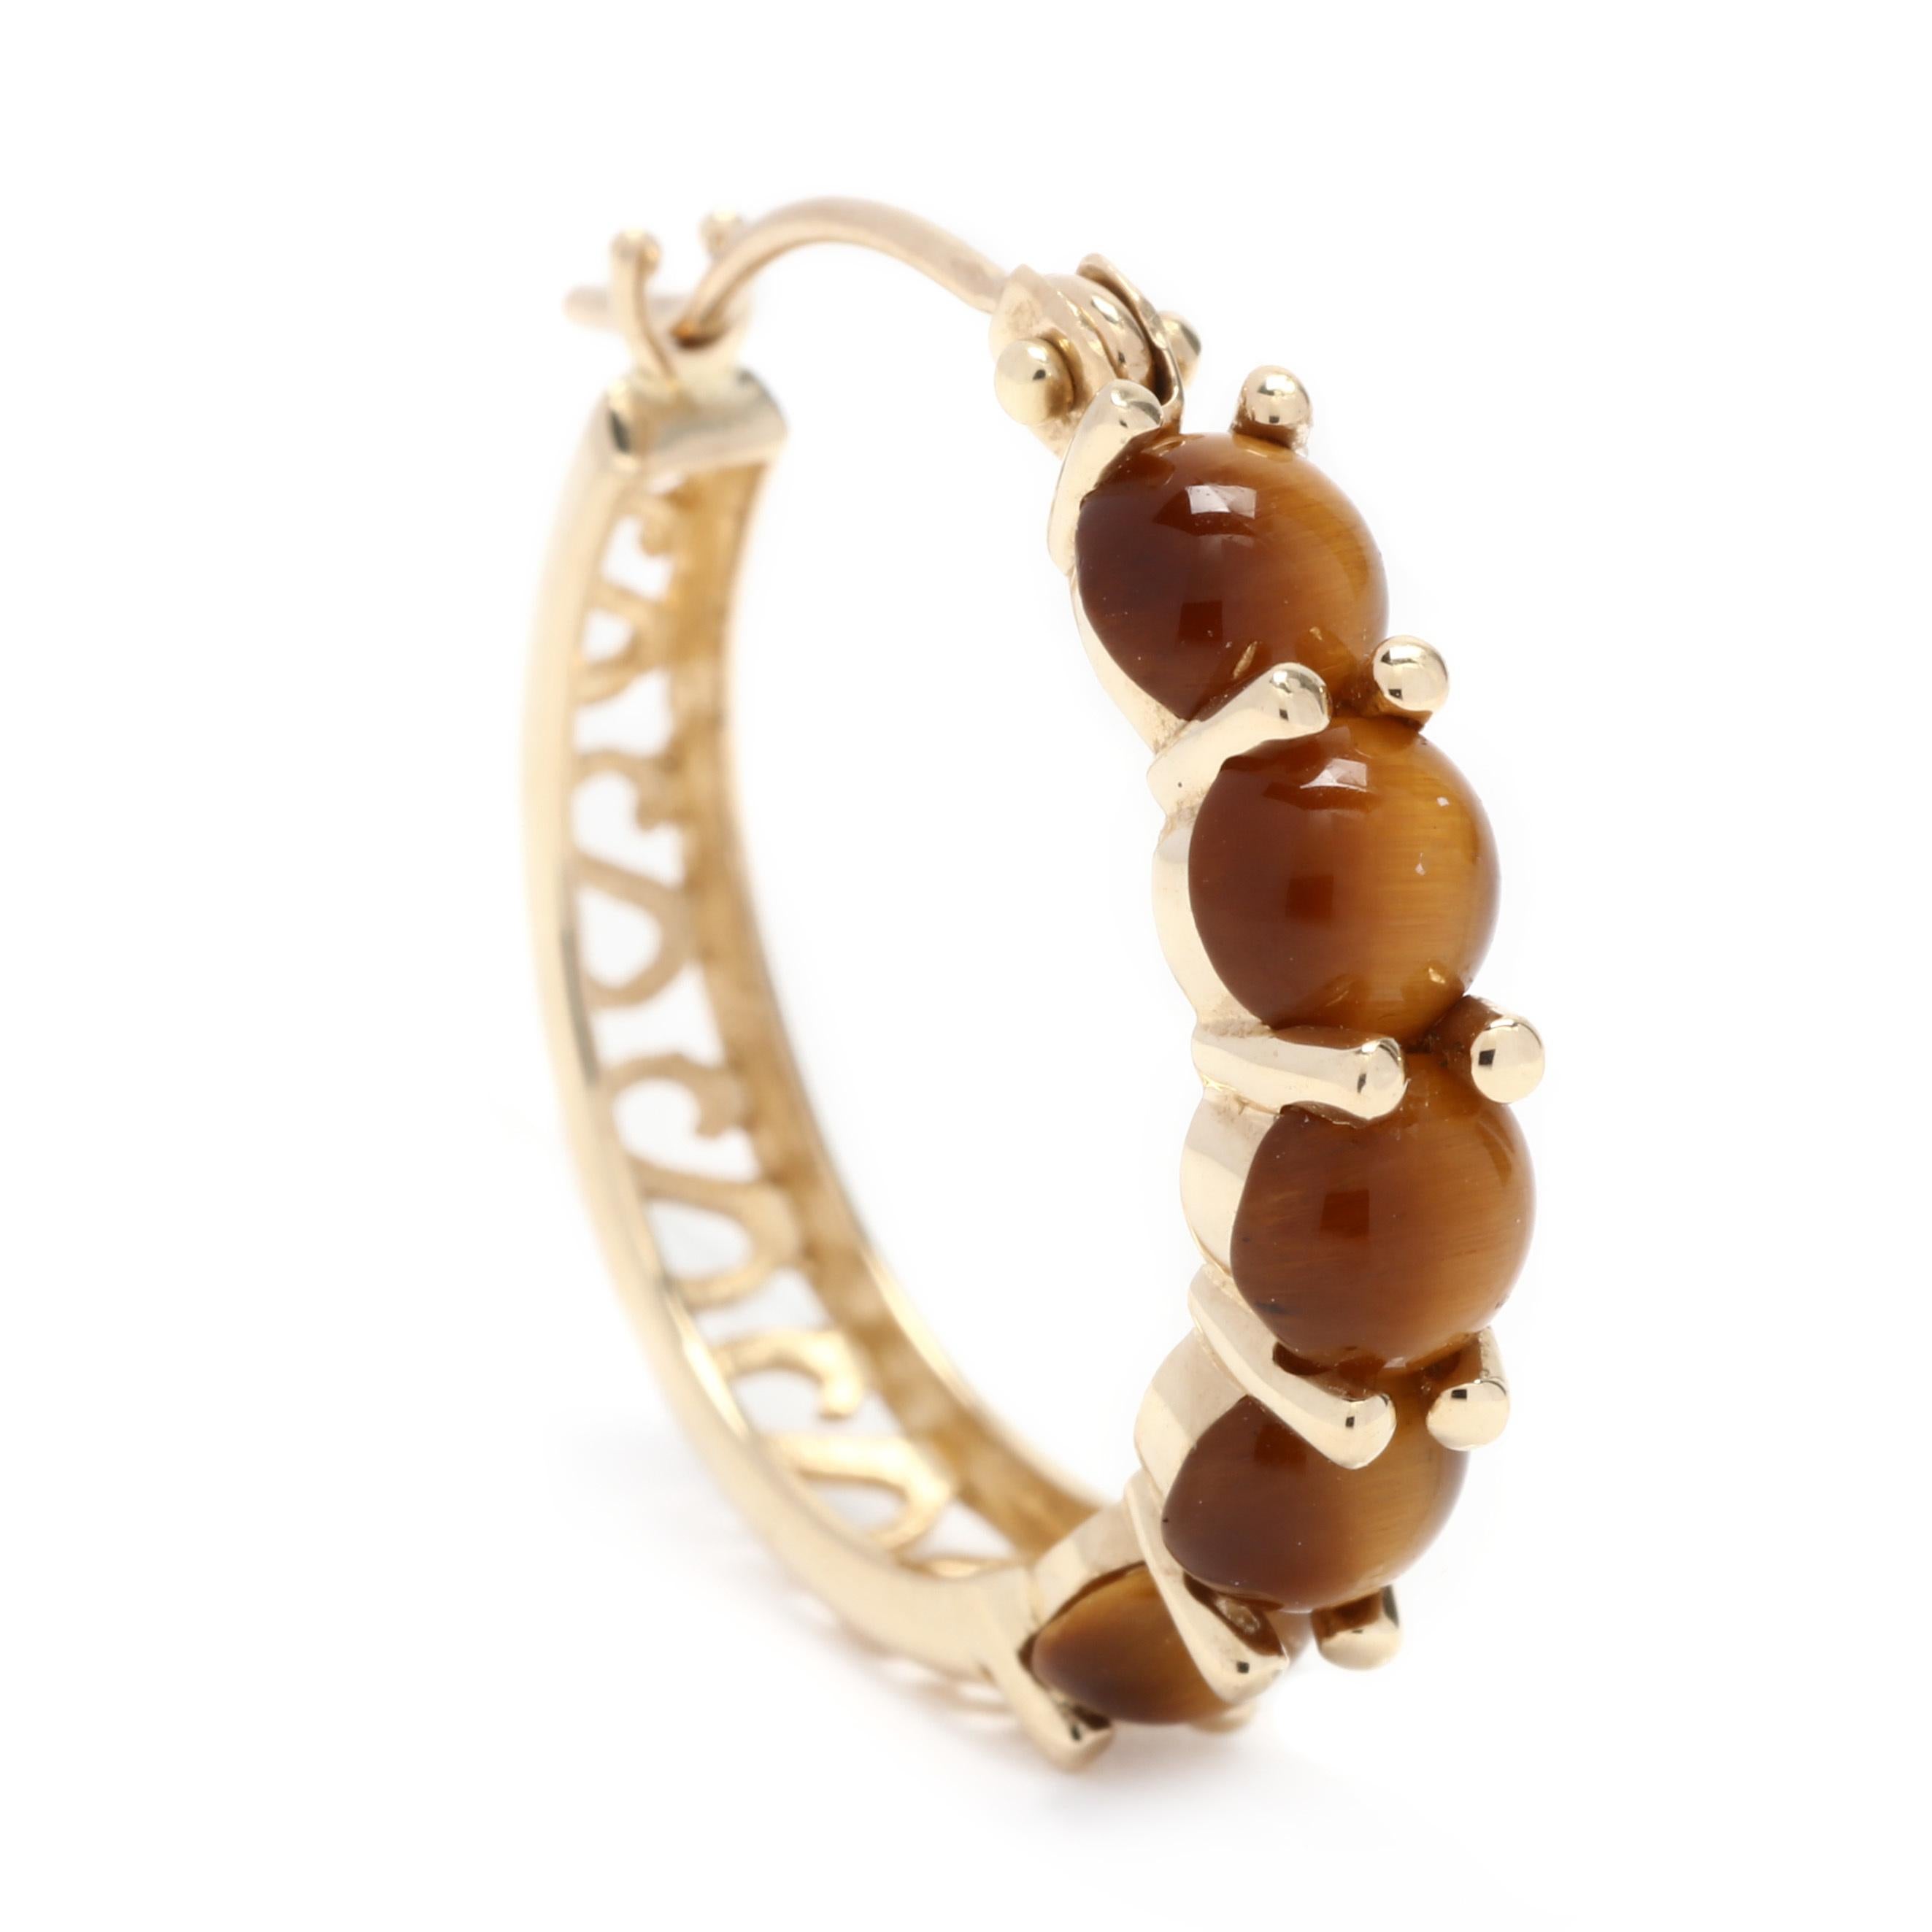 A pair of 14 karat yellow gold and tiger's eye hoop earrings. These earrings features ten round cabochon tiger's eye stones with a filigree backs and snap closures.

Stones:

- tiger's eye, 10 stones

- round cabochon

- 4.25 mm

Length: 3/4